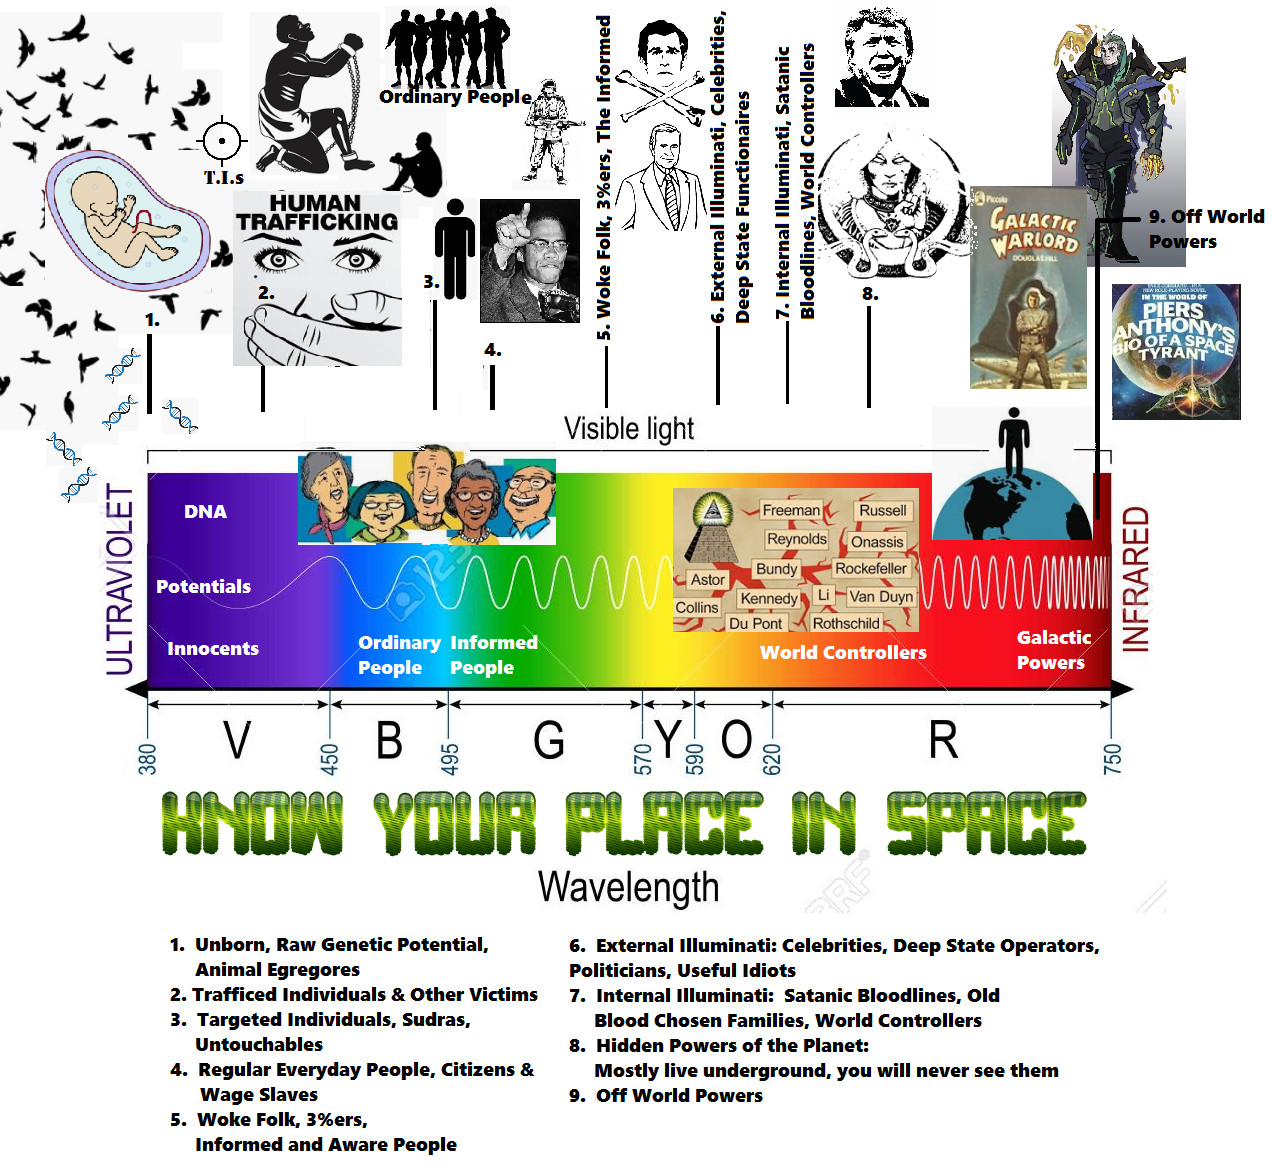 Infographic: Spectrum The Milieu-Know Your Place in Space